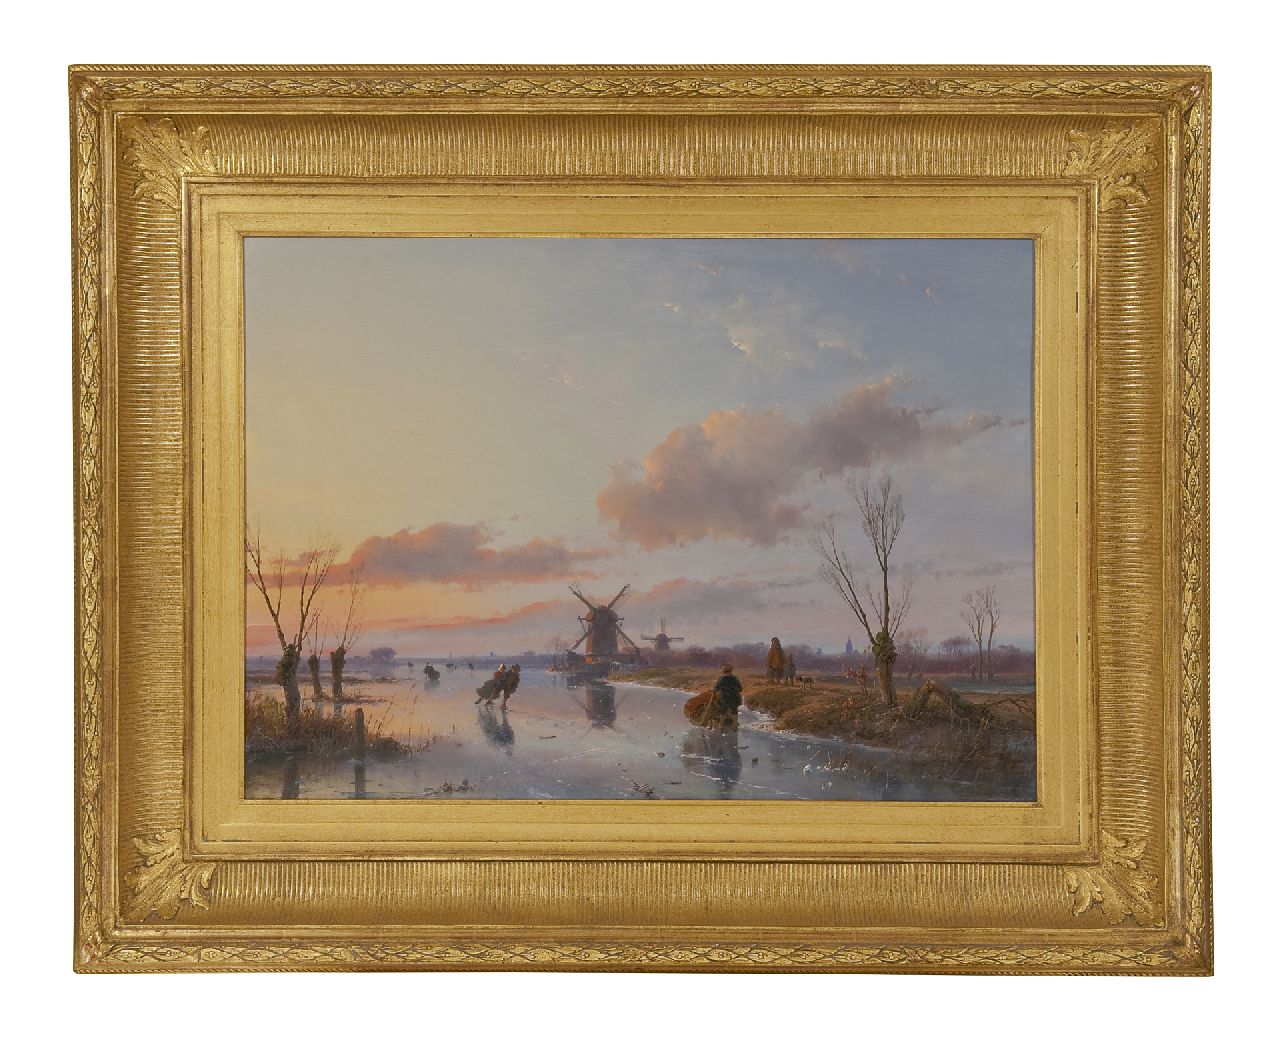 Schelfhout A.  | Andreas Schelfhout, Skaters on a Dutch waterway at sunset, Öl auf Holz 47,1 x 66,3 cm, signed l.r. und dated 1845